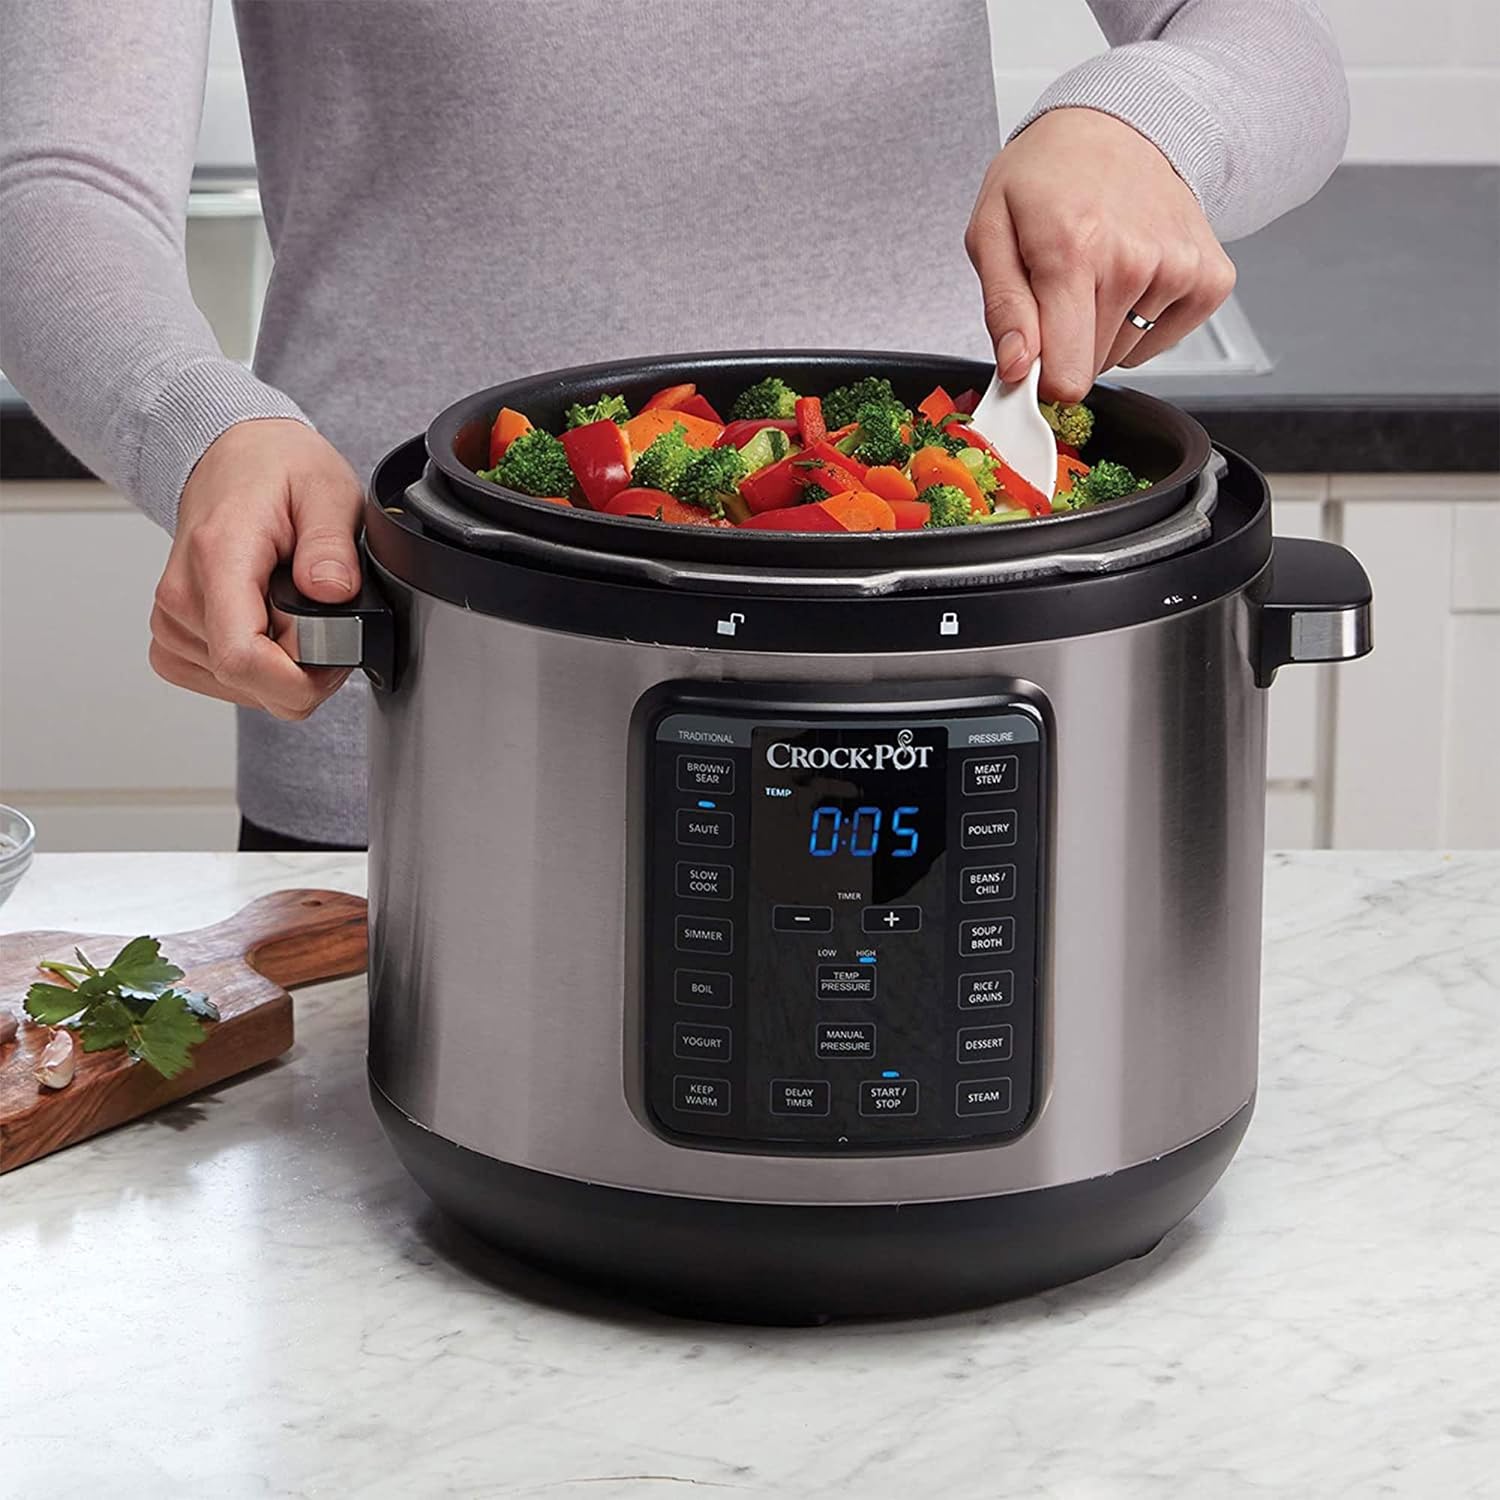 Crock-Pot 8-Quart Multi-Use XL Express Crock Programmable Slow Cooker and Pressure Cooker with Manual Pressure, Boil  Simmer, Black Stainless